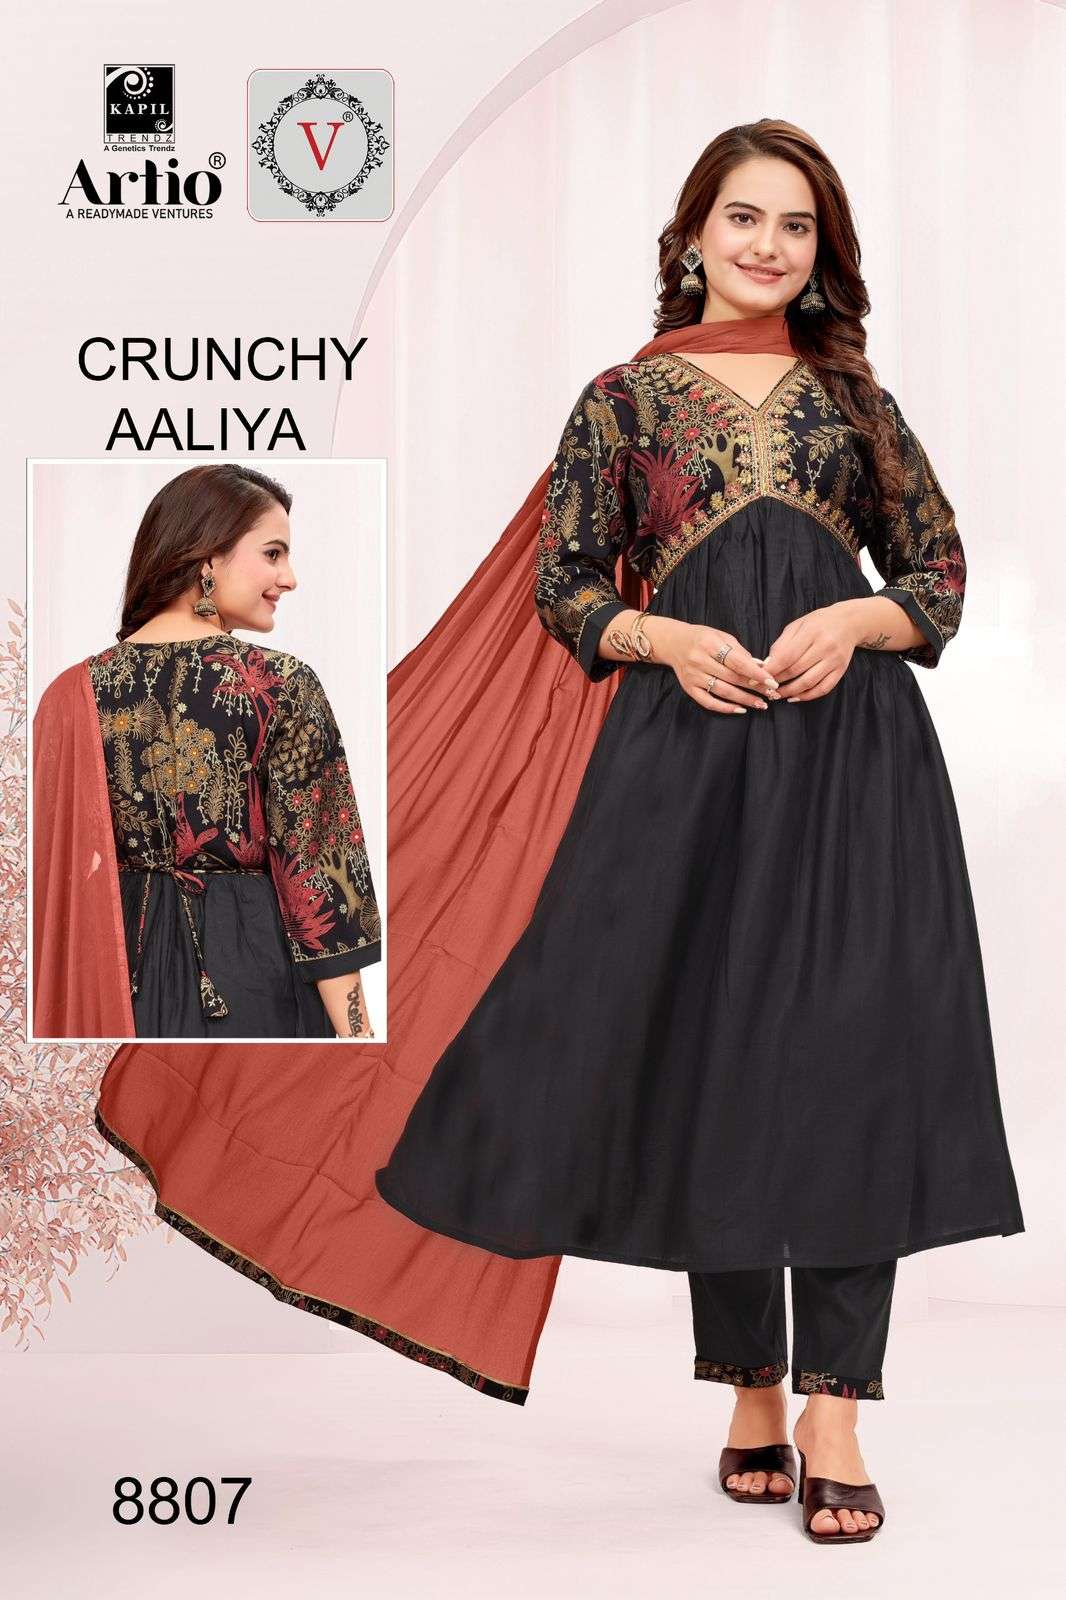 CHRUNCHY ALIA MODAL PRINTED EMBROIDERY WORK KURTI WITH PANT AND NAZMIN DUPATTA BY VEDA BRAND WHOLESA...